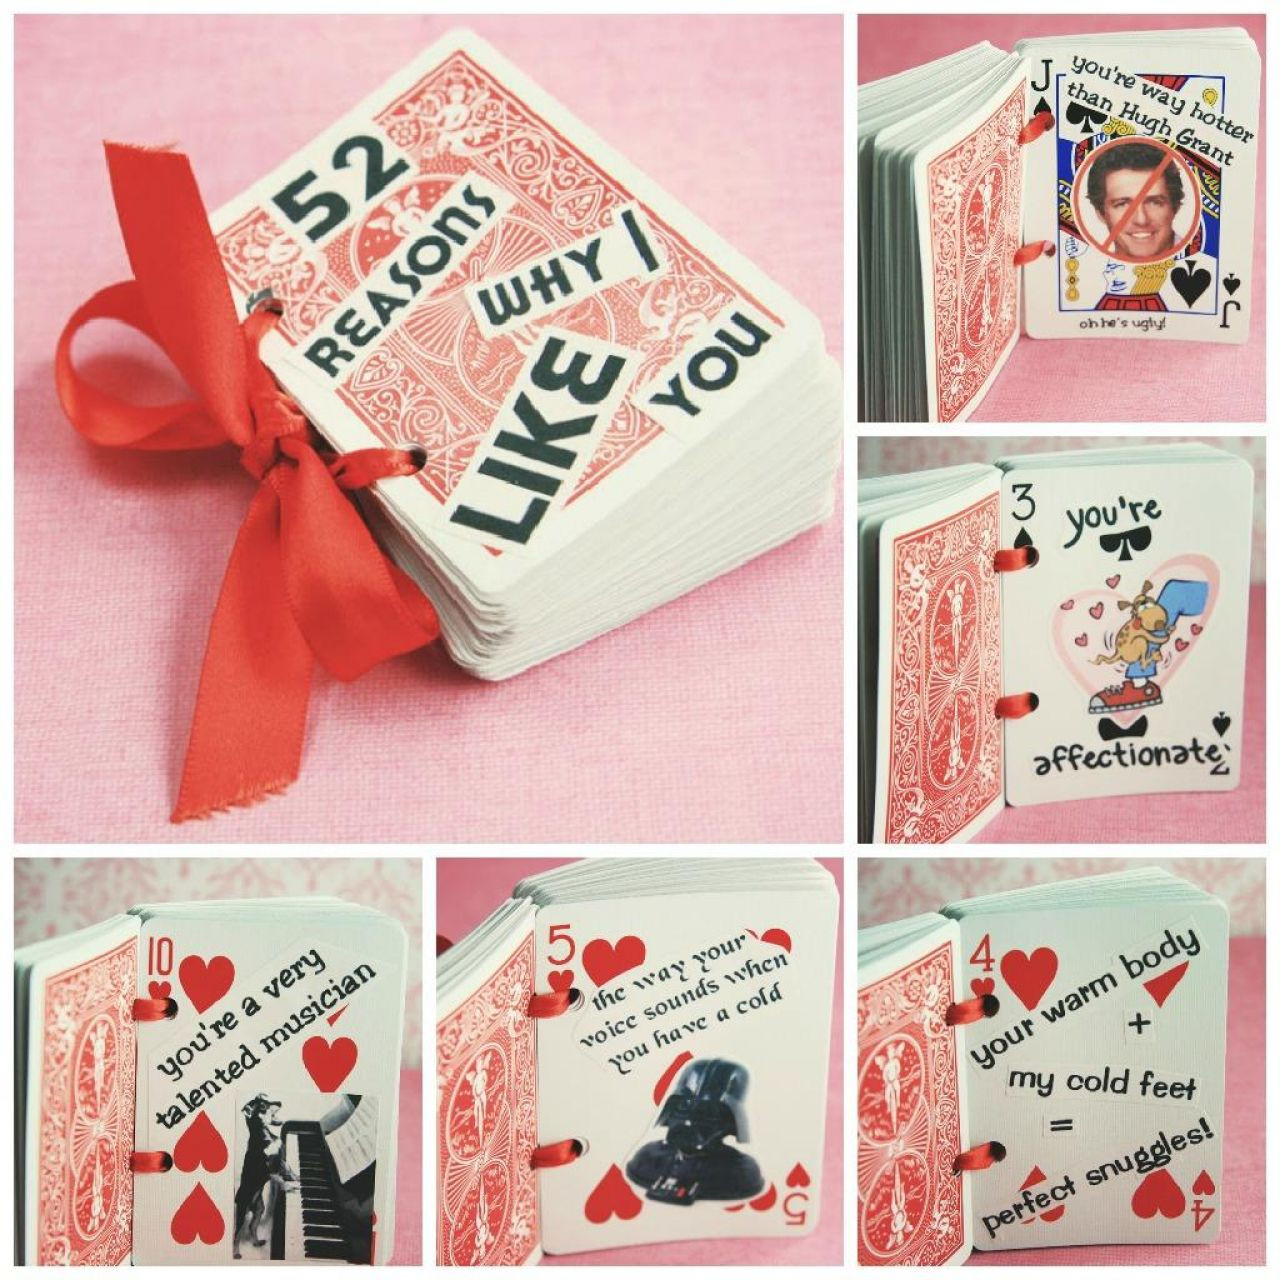 Unconventional Valentines Gift Ideas
 17 Last Minute Handmade Valentine Gifts for Him